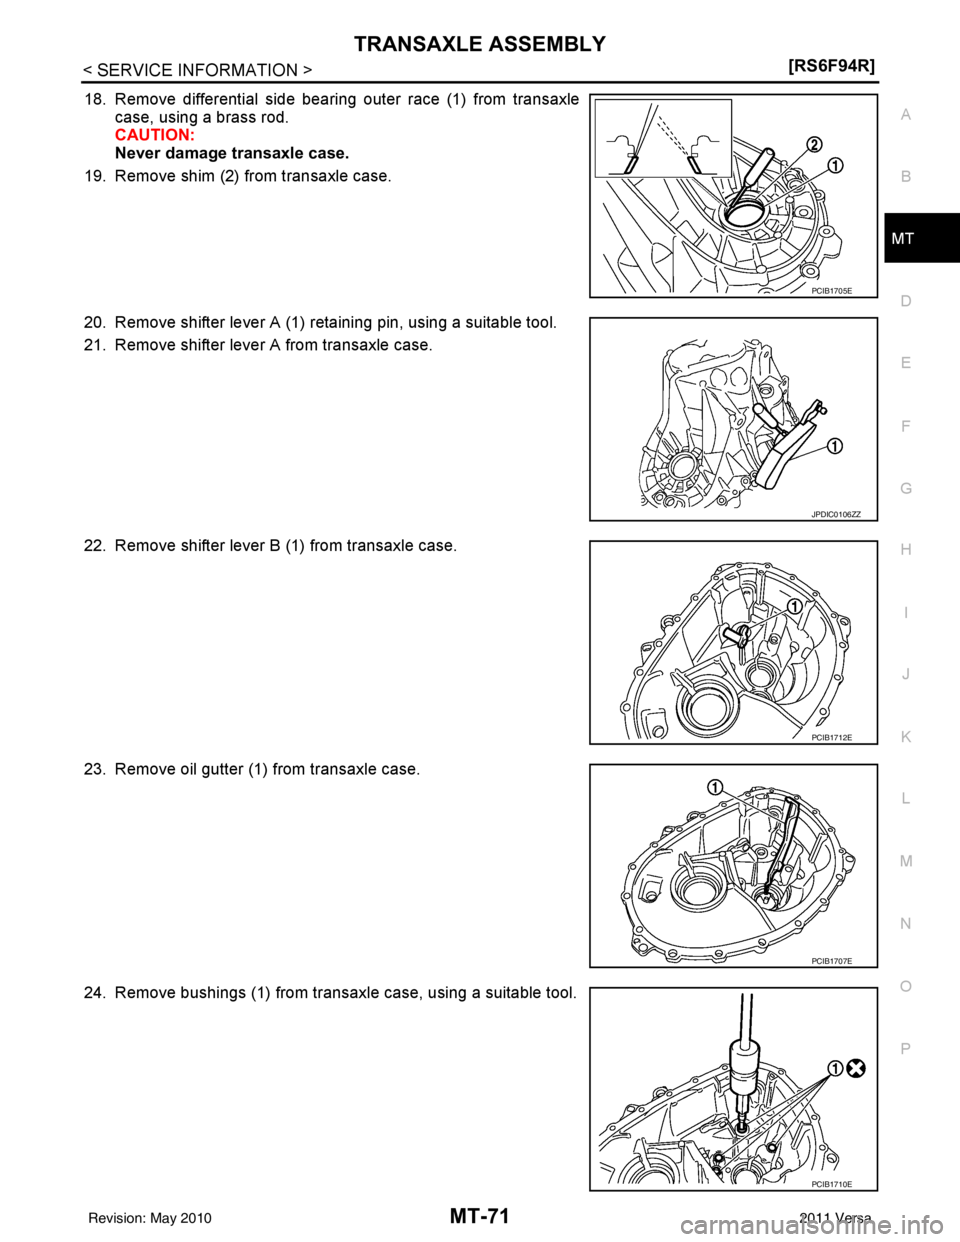 NISSAN LATIO 2011  Service Repair Manual TRANSAXLE ASSEMBLYMT-71
< SERVICE INFORMATION > [RS6F94R]
D
E
F
G H
I
J
K L
M A
B
MT
N
O P
18. Remove differential side bearing outer race (1) from transaxle case, using a brass rod.
CAUTION:
Never da